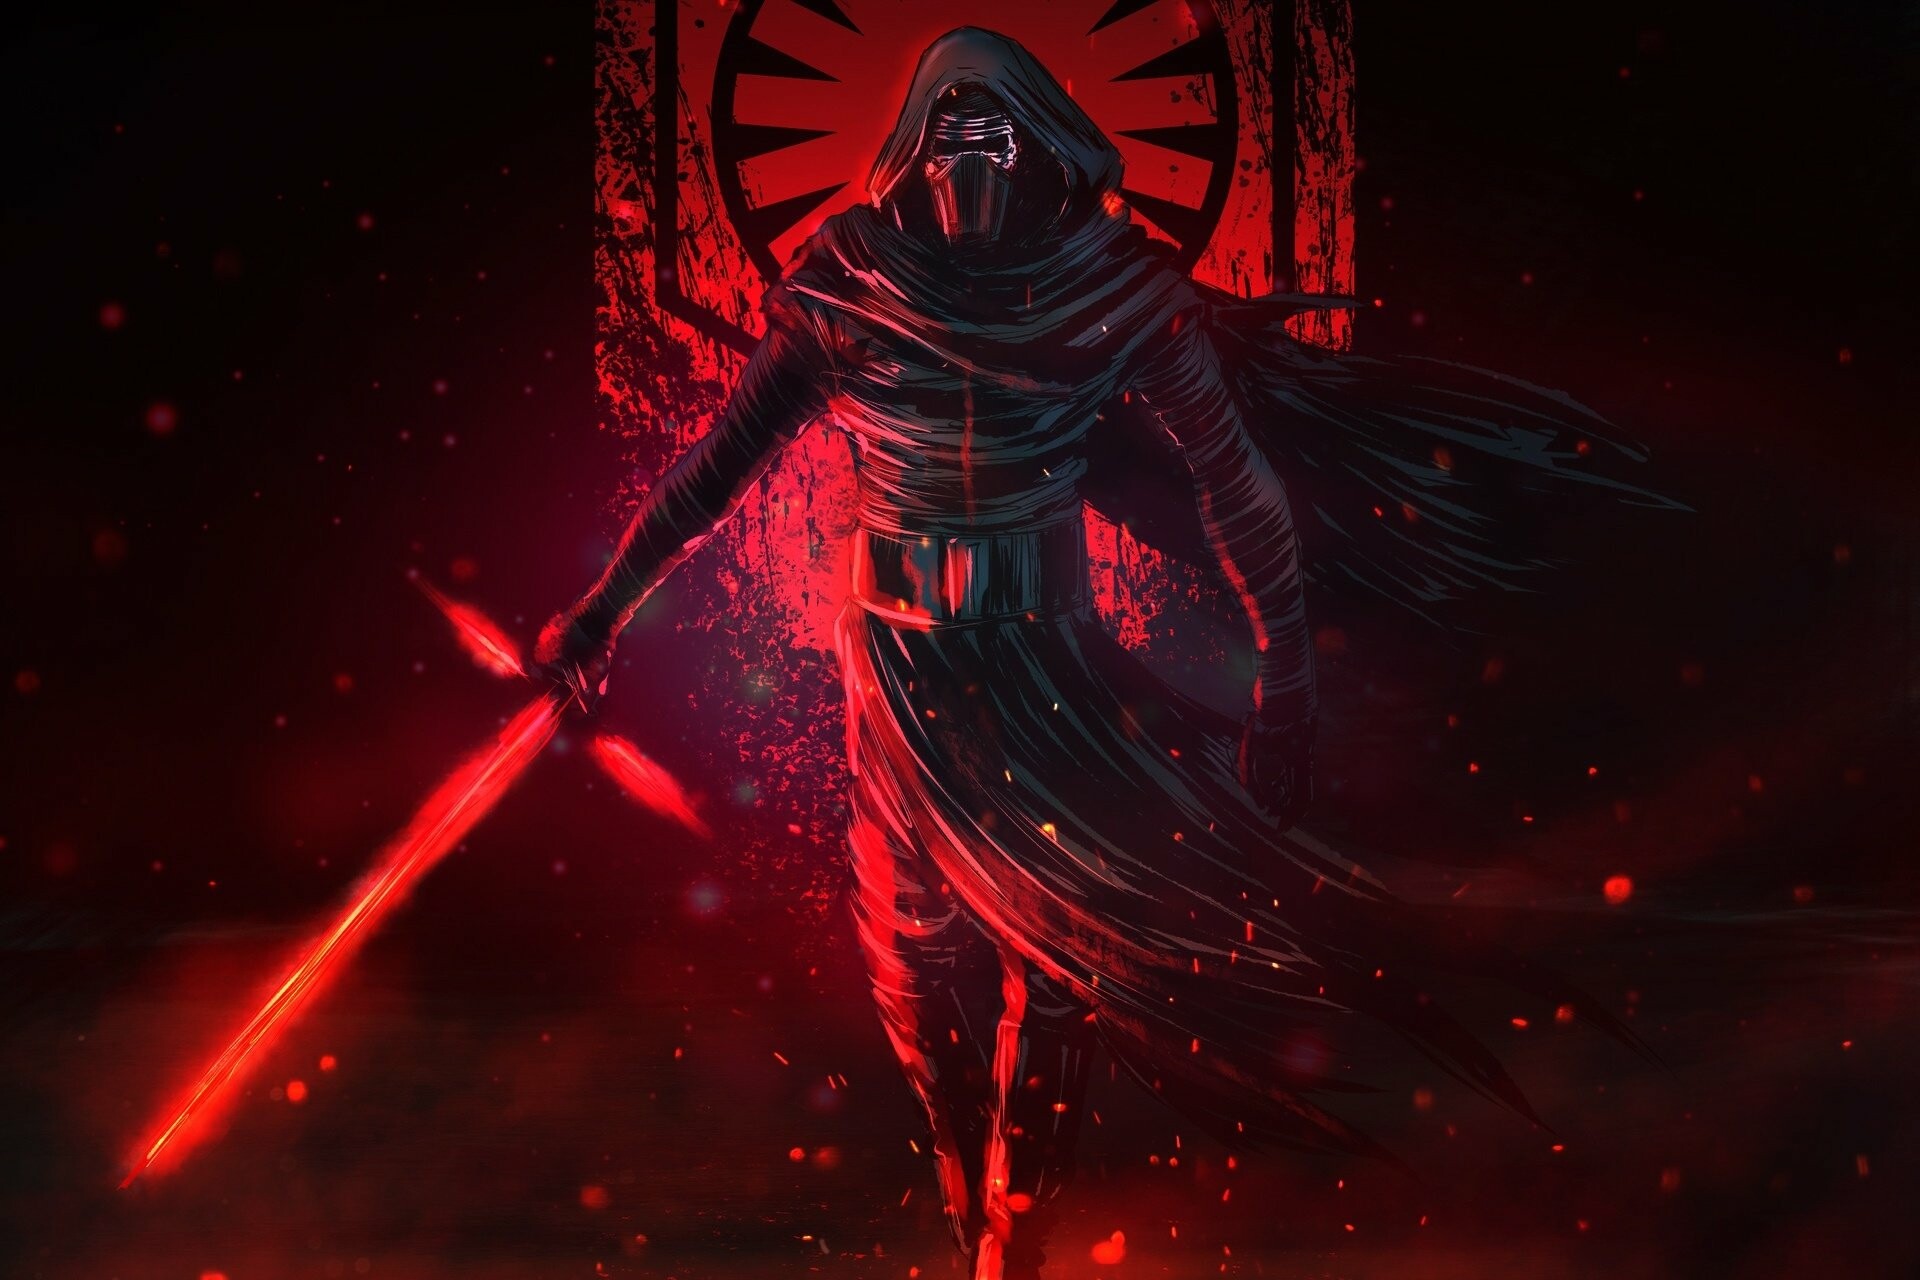 Star Wars: The Last Jedi, A 2017 American epic space opera film written and directed by Rian Johnson. 1920x1280 HD Background.